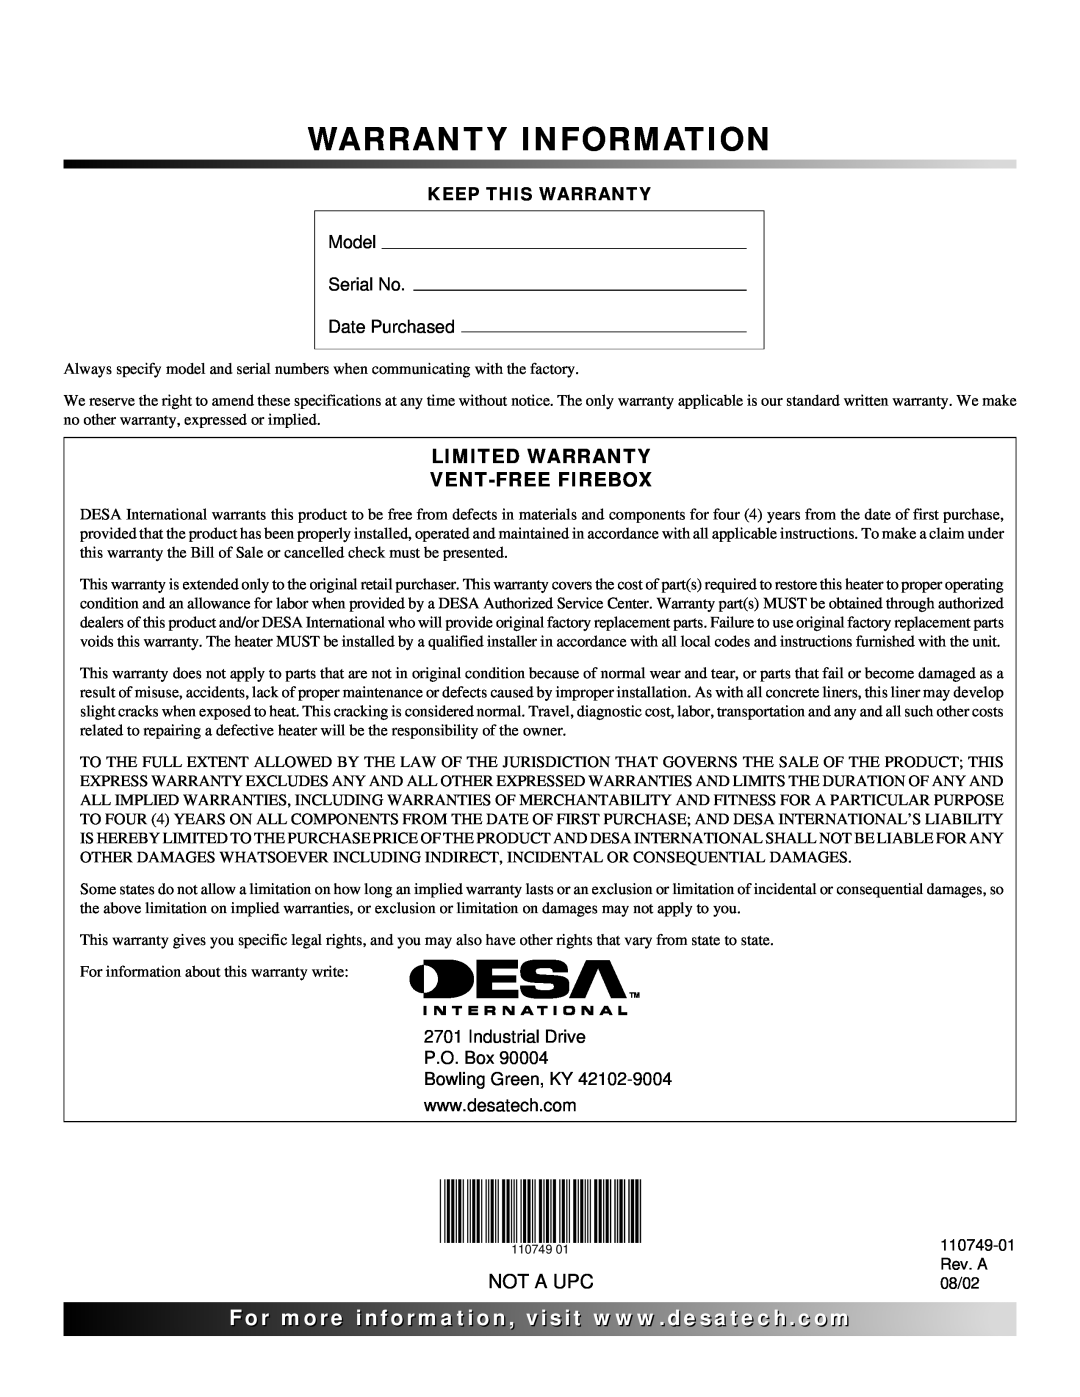 Desa V50S Warranty Information, Not A Upc, Model Serial No Date Purchased, Industrial Drive P.O. Box Bowling Green, KY 